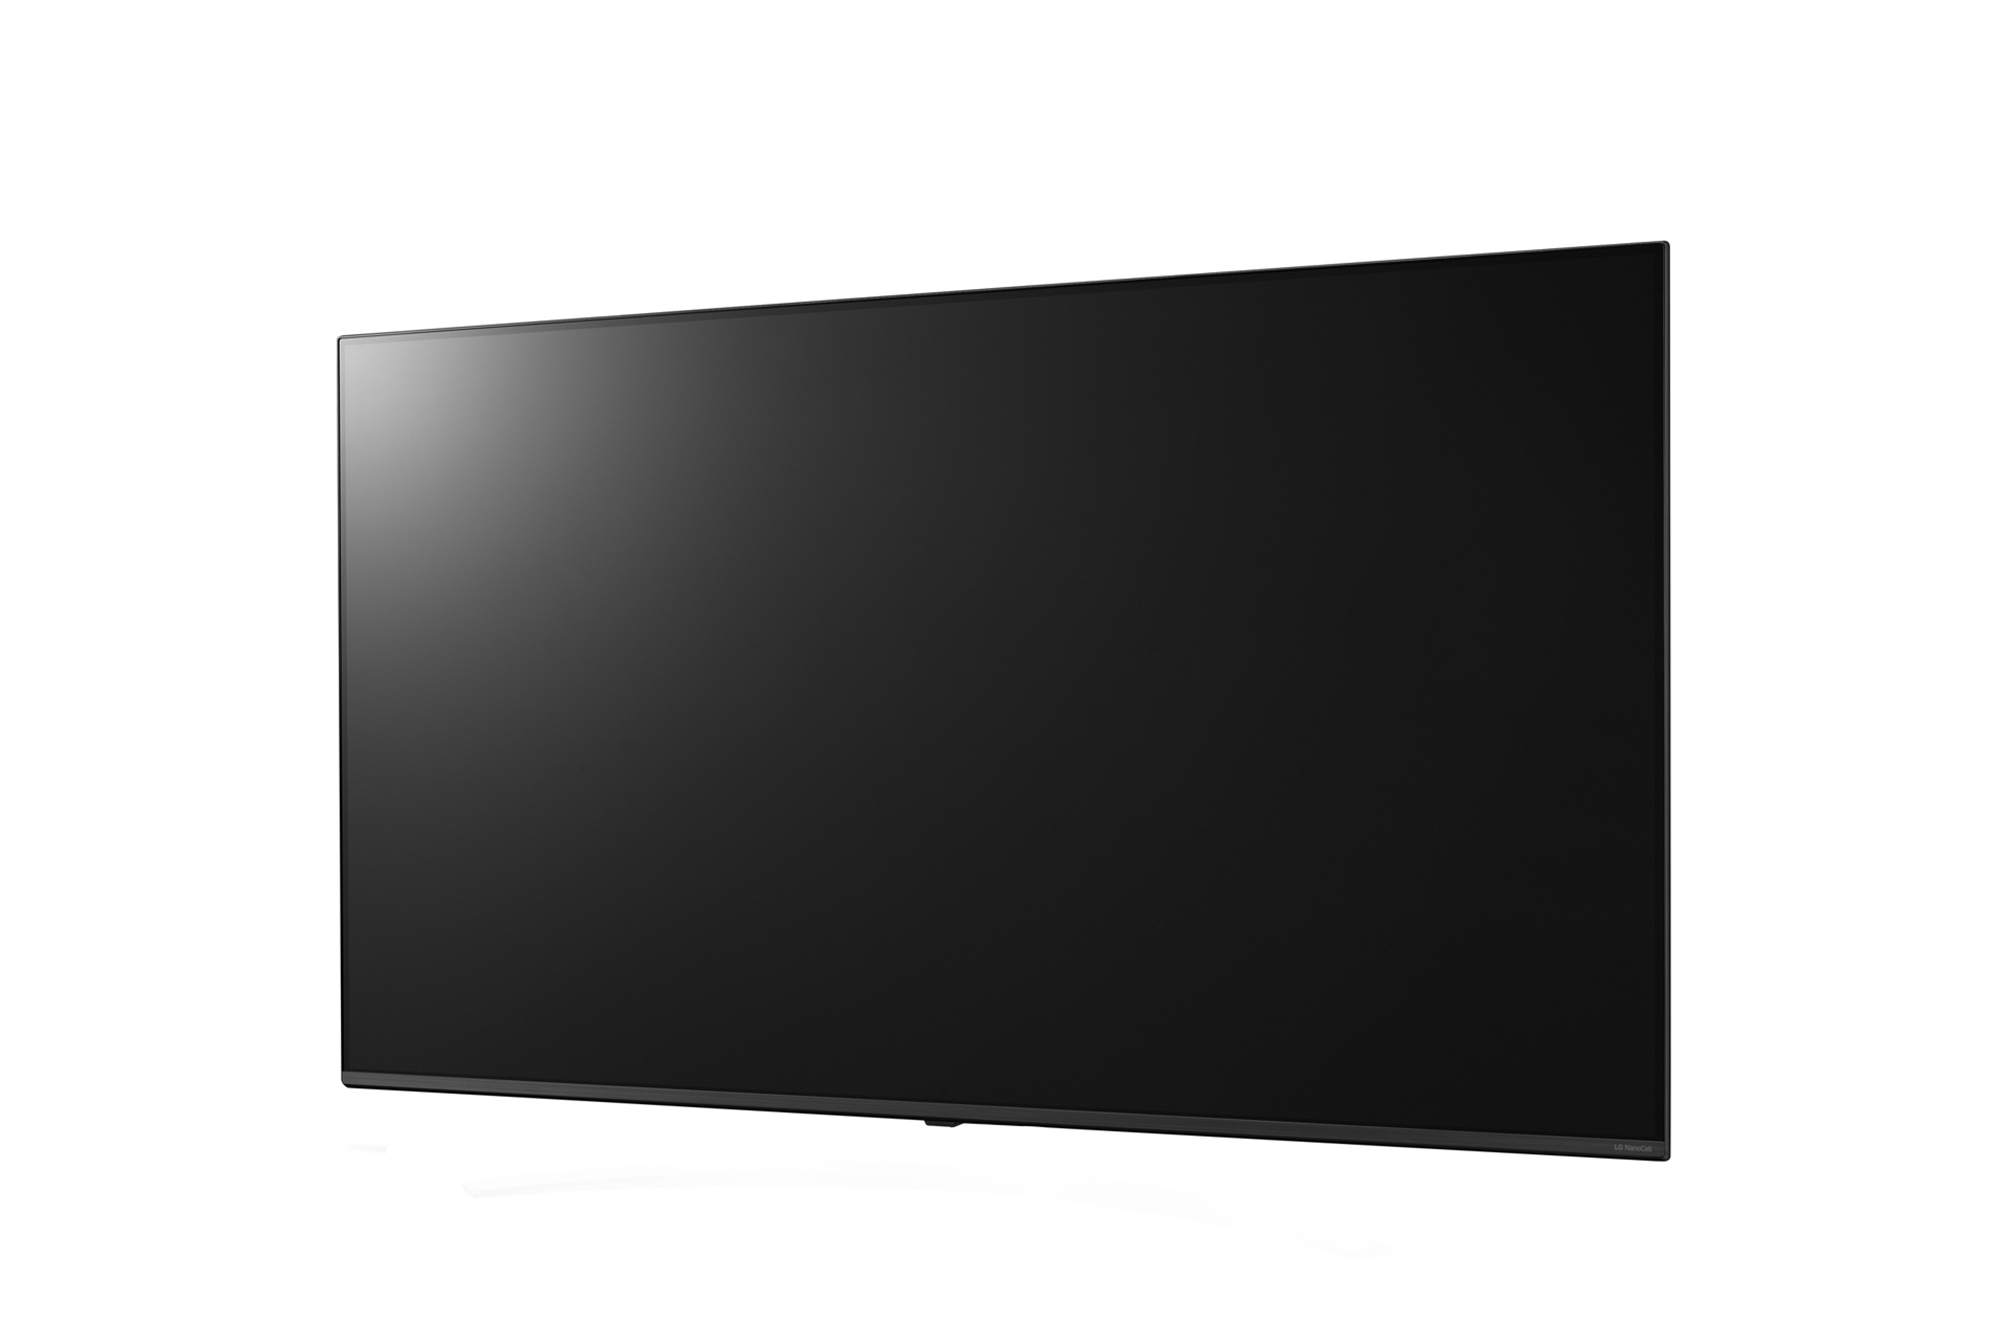 Commercial TV 65UR762H (MEA), -15 degree side view